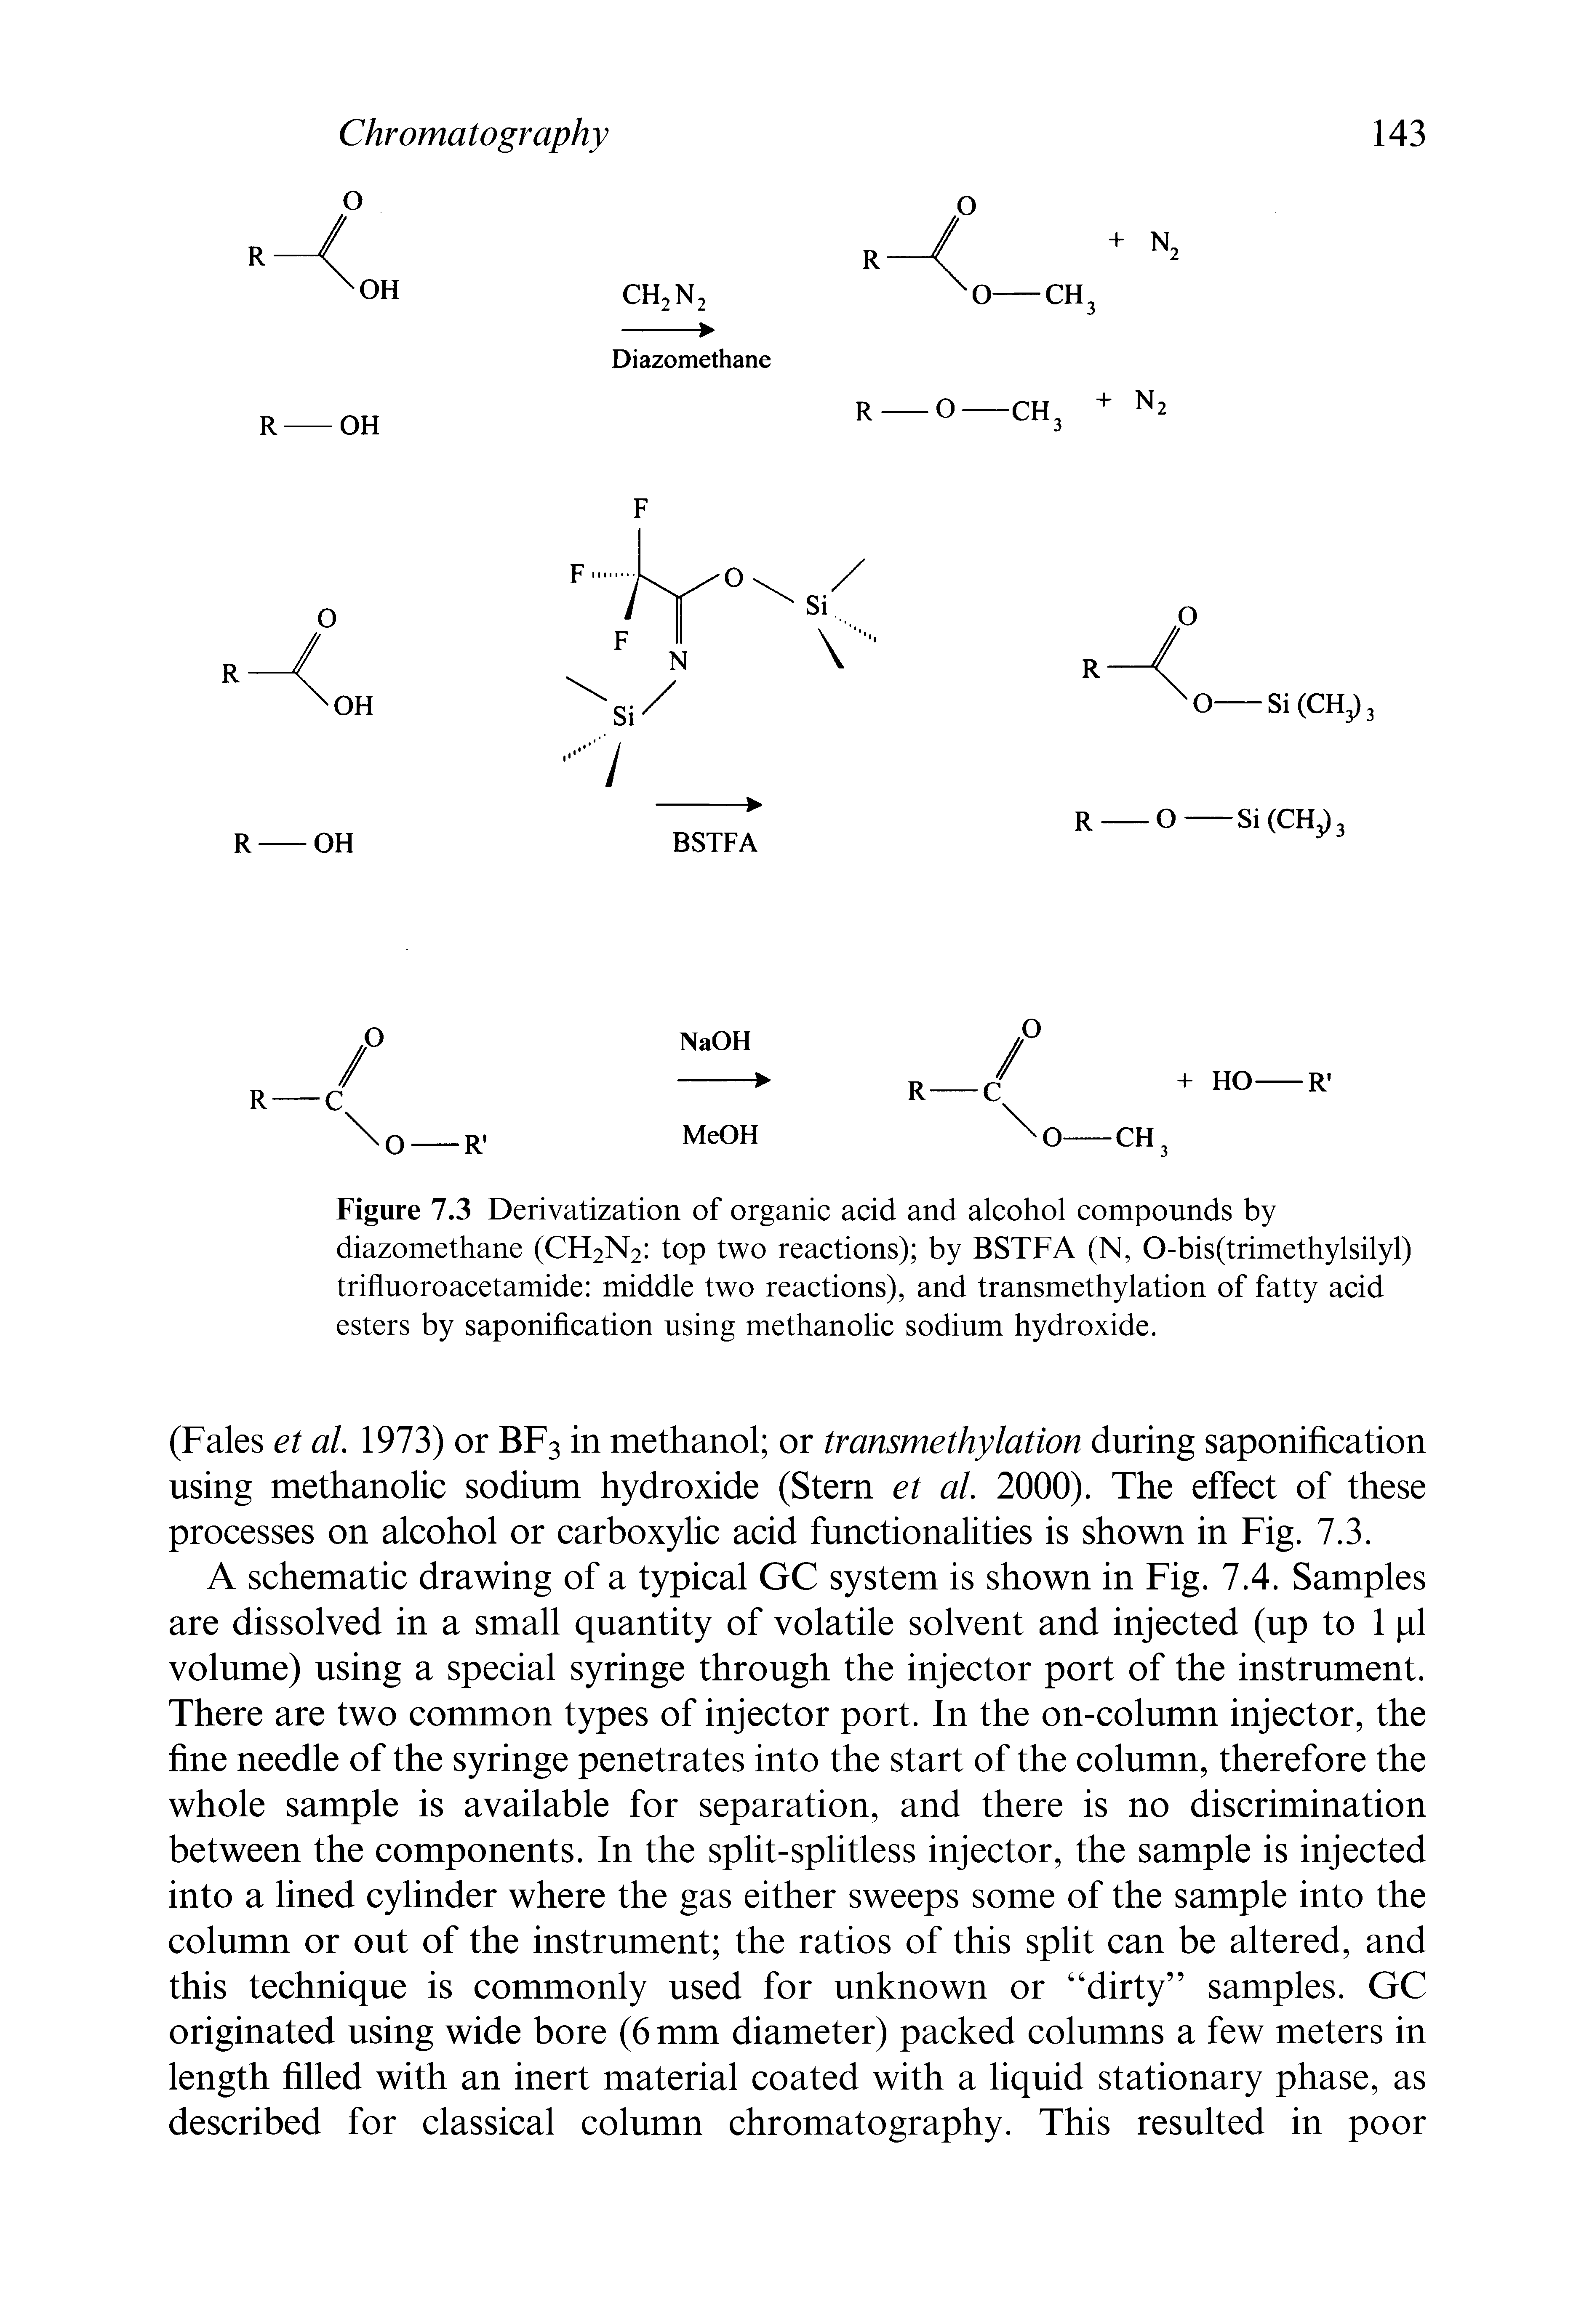 Figure 7.3 Derivatization of organic acid and alcohol compounds by diazomethane (CH2N2 top two reactions) by BSTFA (N, O-bis(trimethylsilyl) trifluoroacetamide middle two reactions), and transmethylation of fatty acid esters by saponification using methanolic sodium hydroxide.